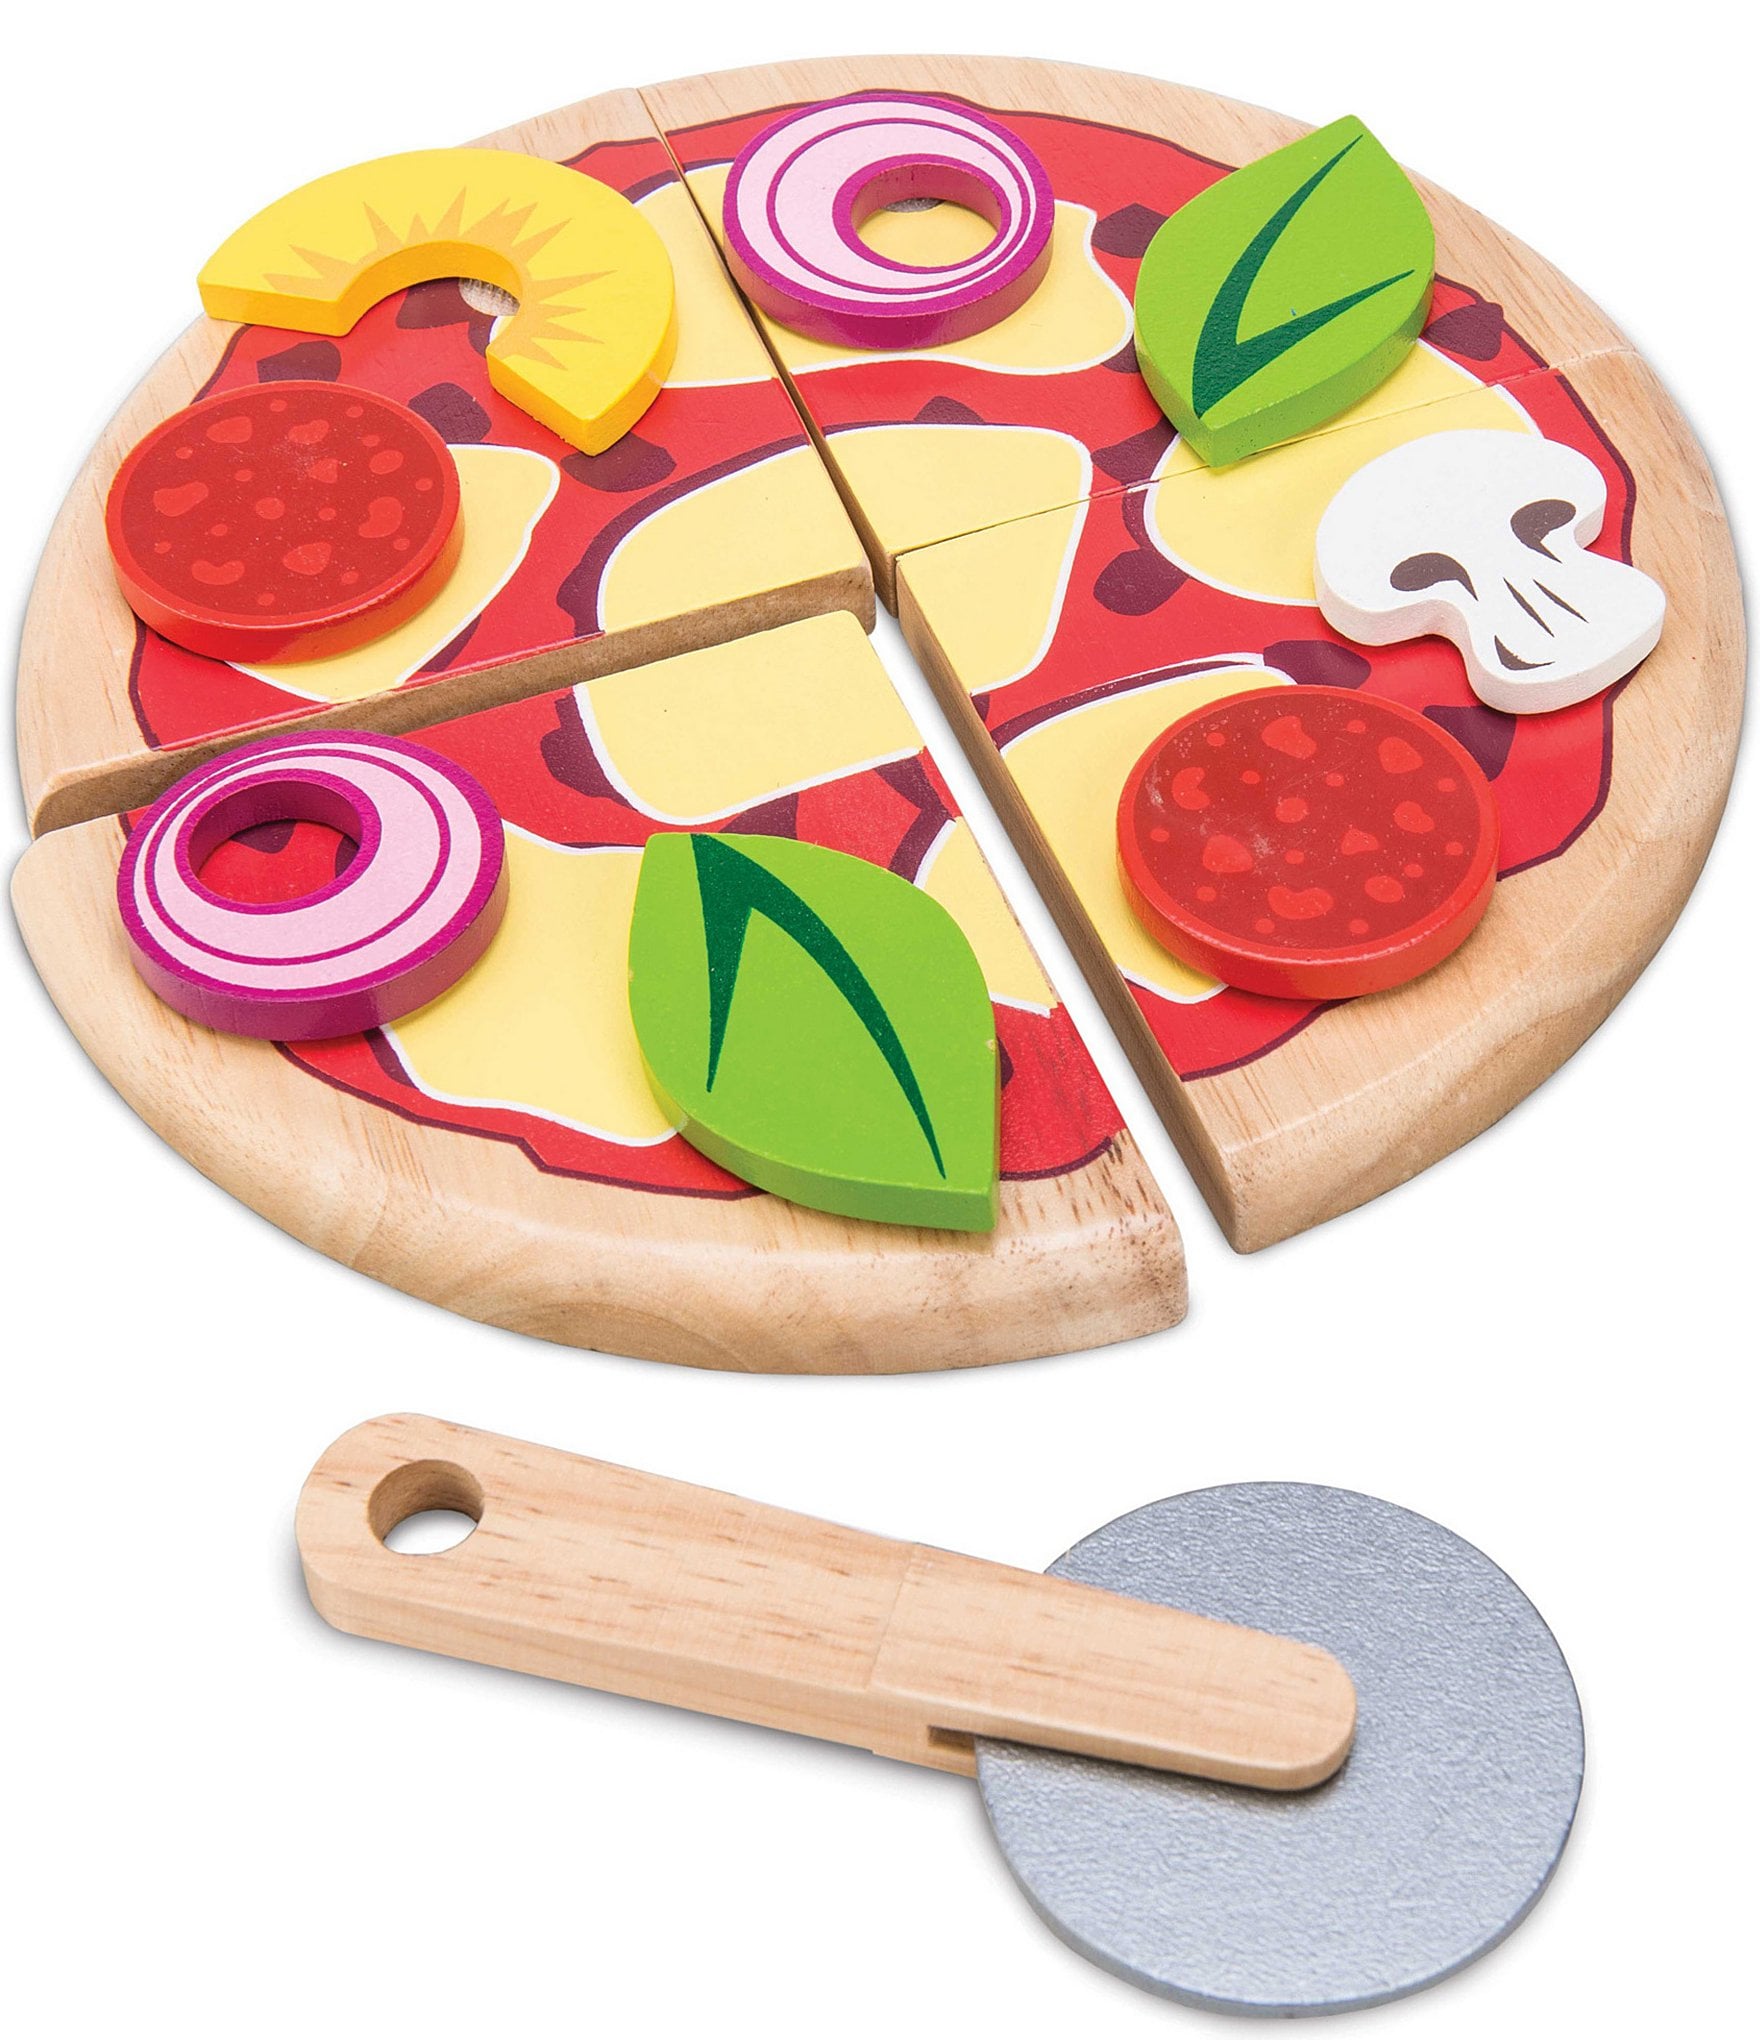 Le Toy Van - Childrens Wood Pretend Play Food | Wooden Honeybake Pizza  Pretend Food Toy Playset | Toy Kitchen Accessories Play Food Role Play Toy